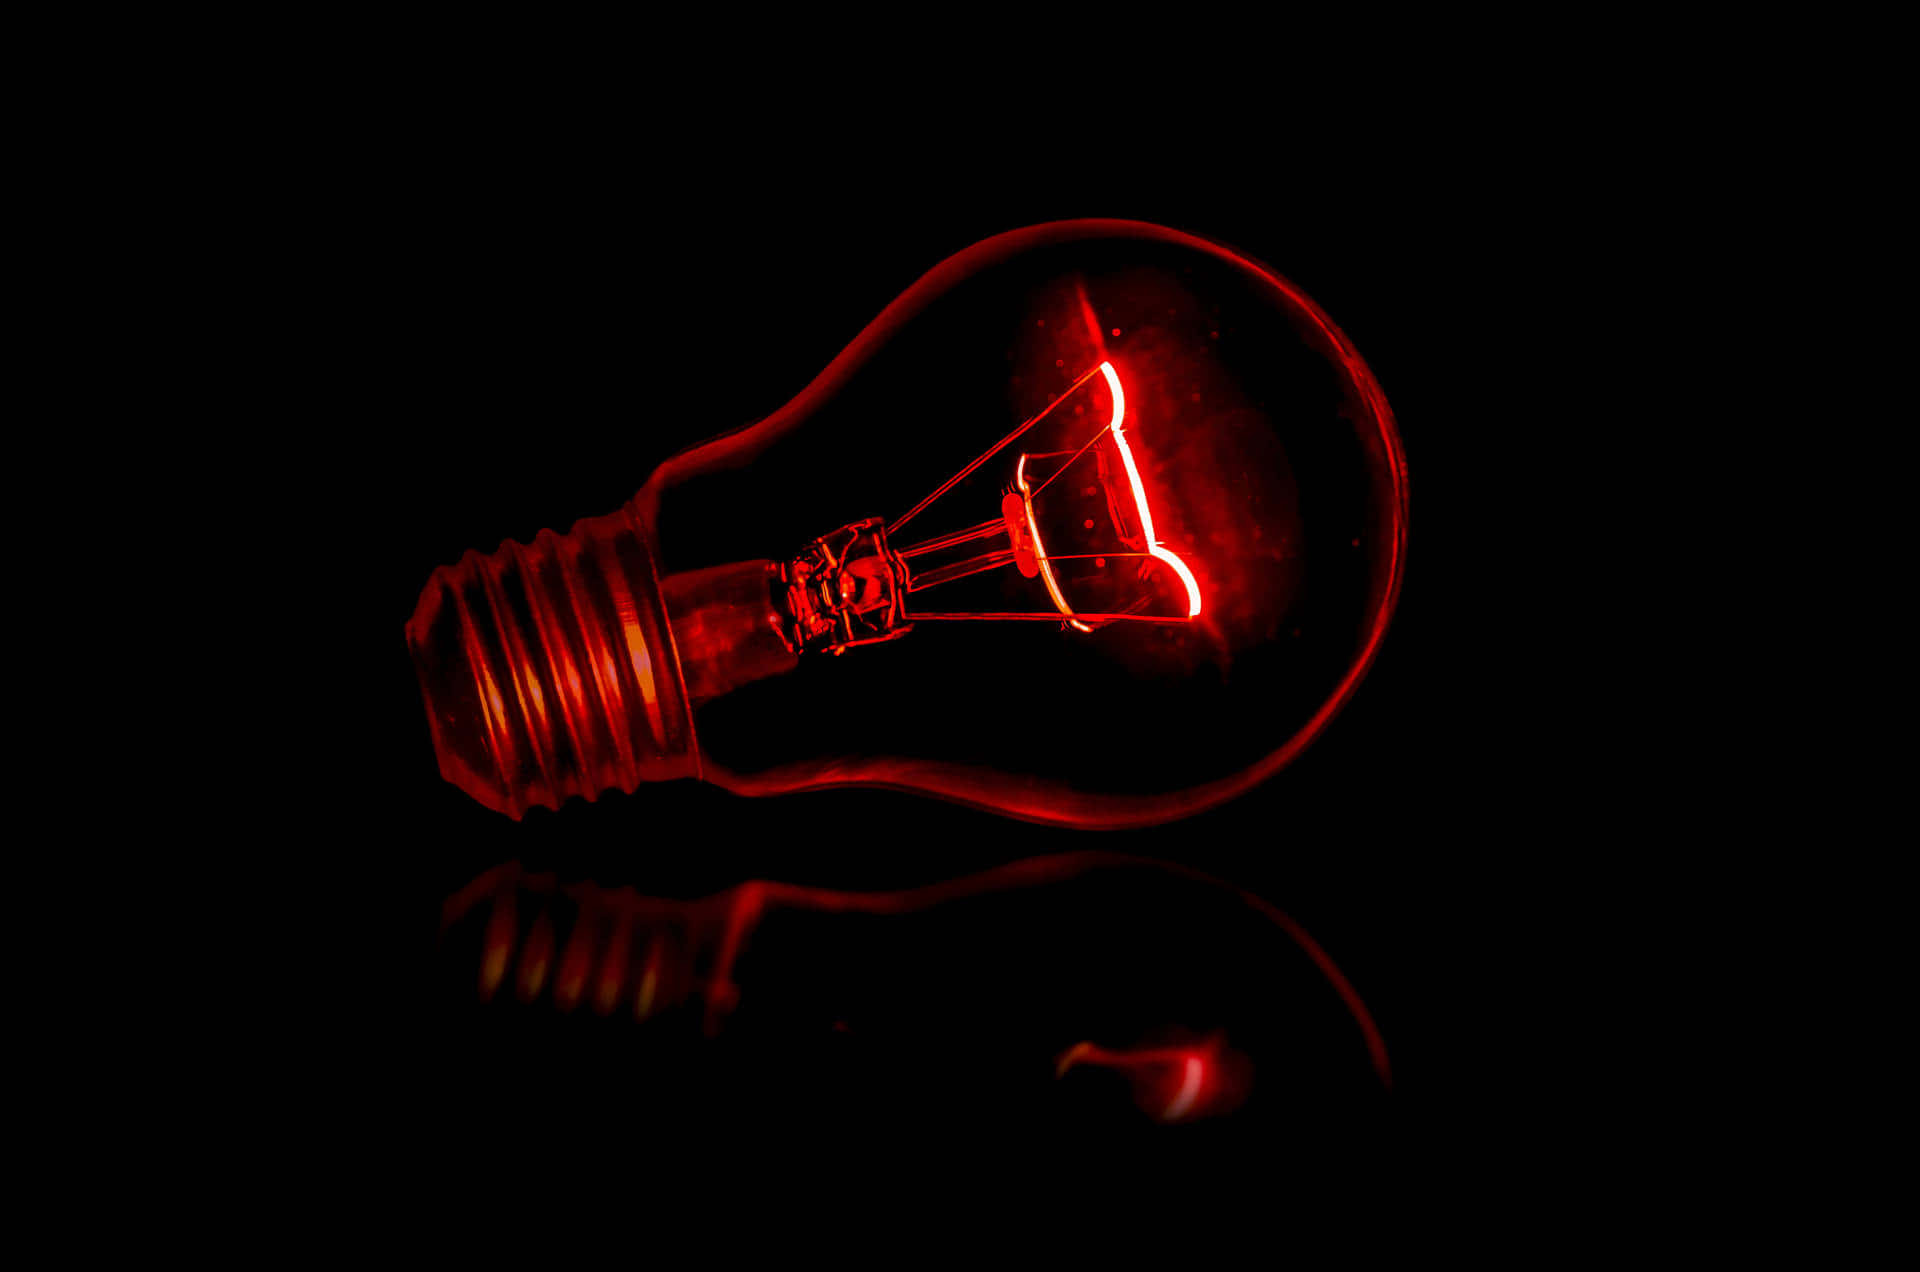 Glowing Red Electric Bulb Wallpaper